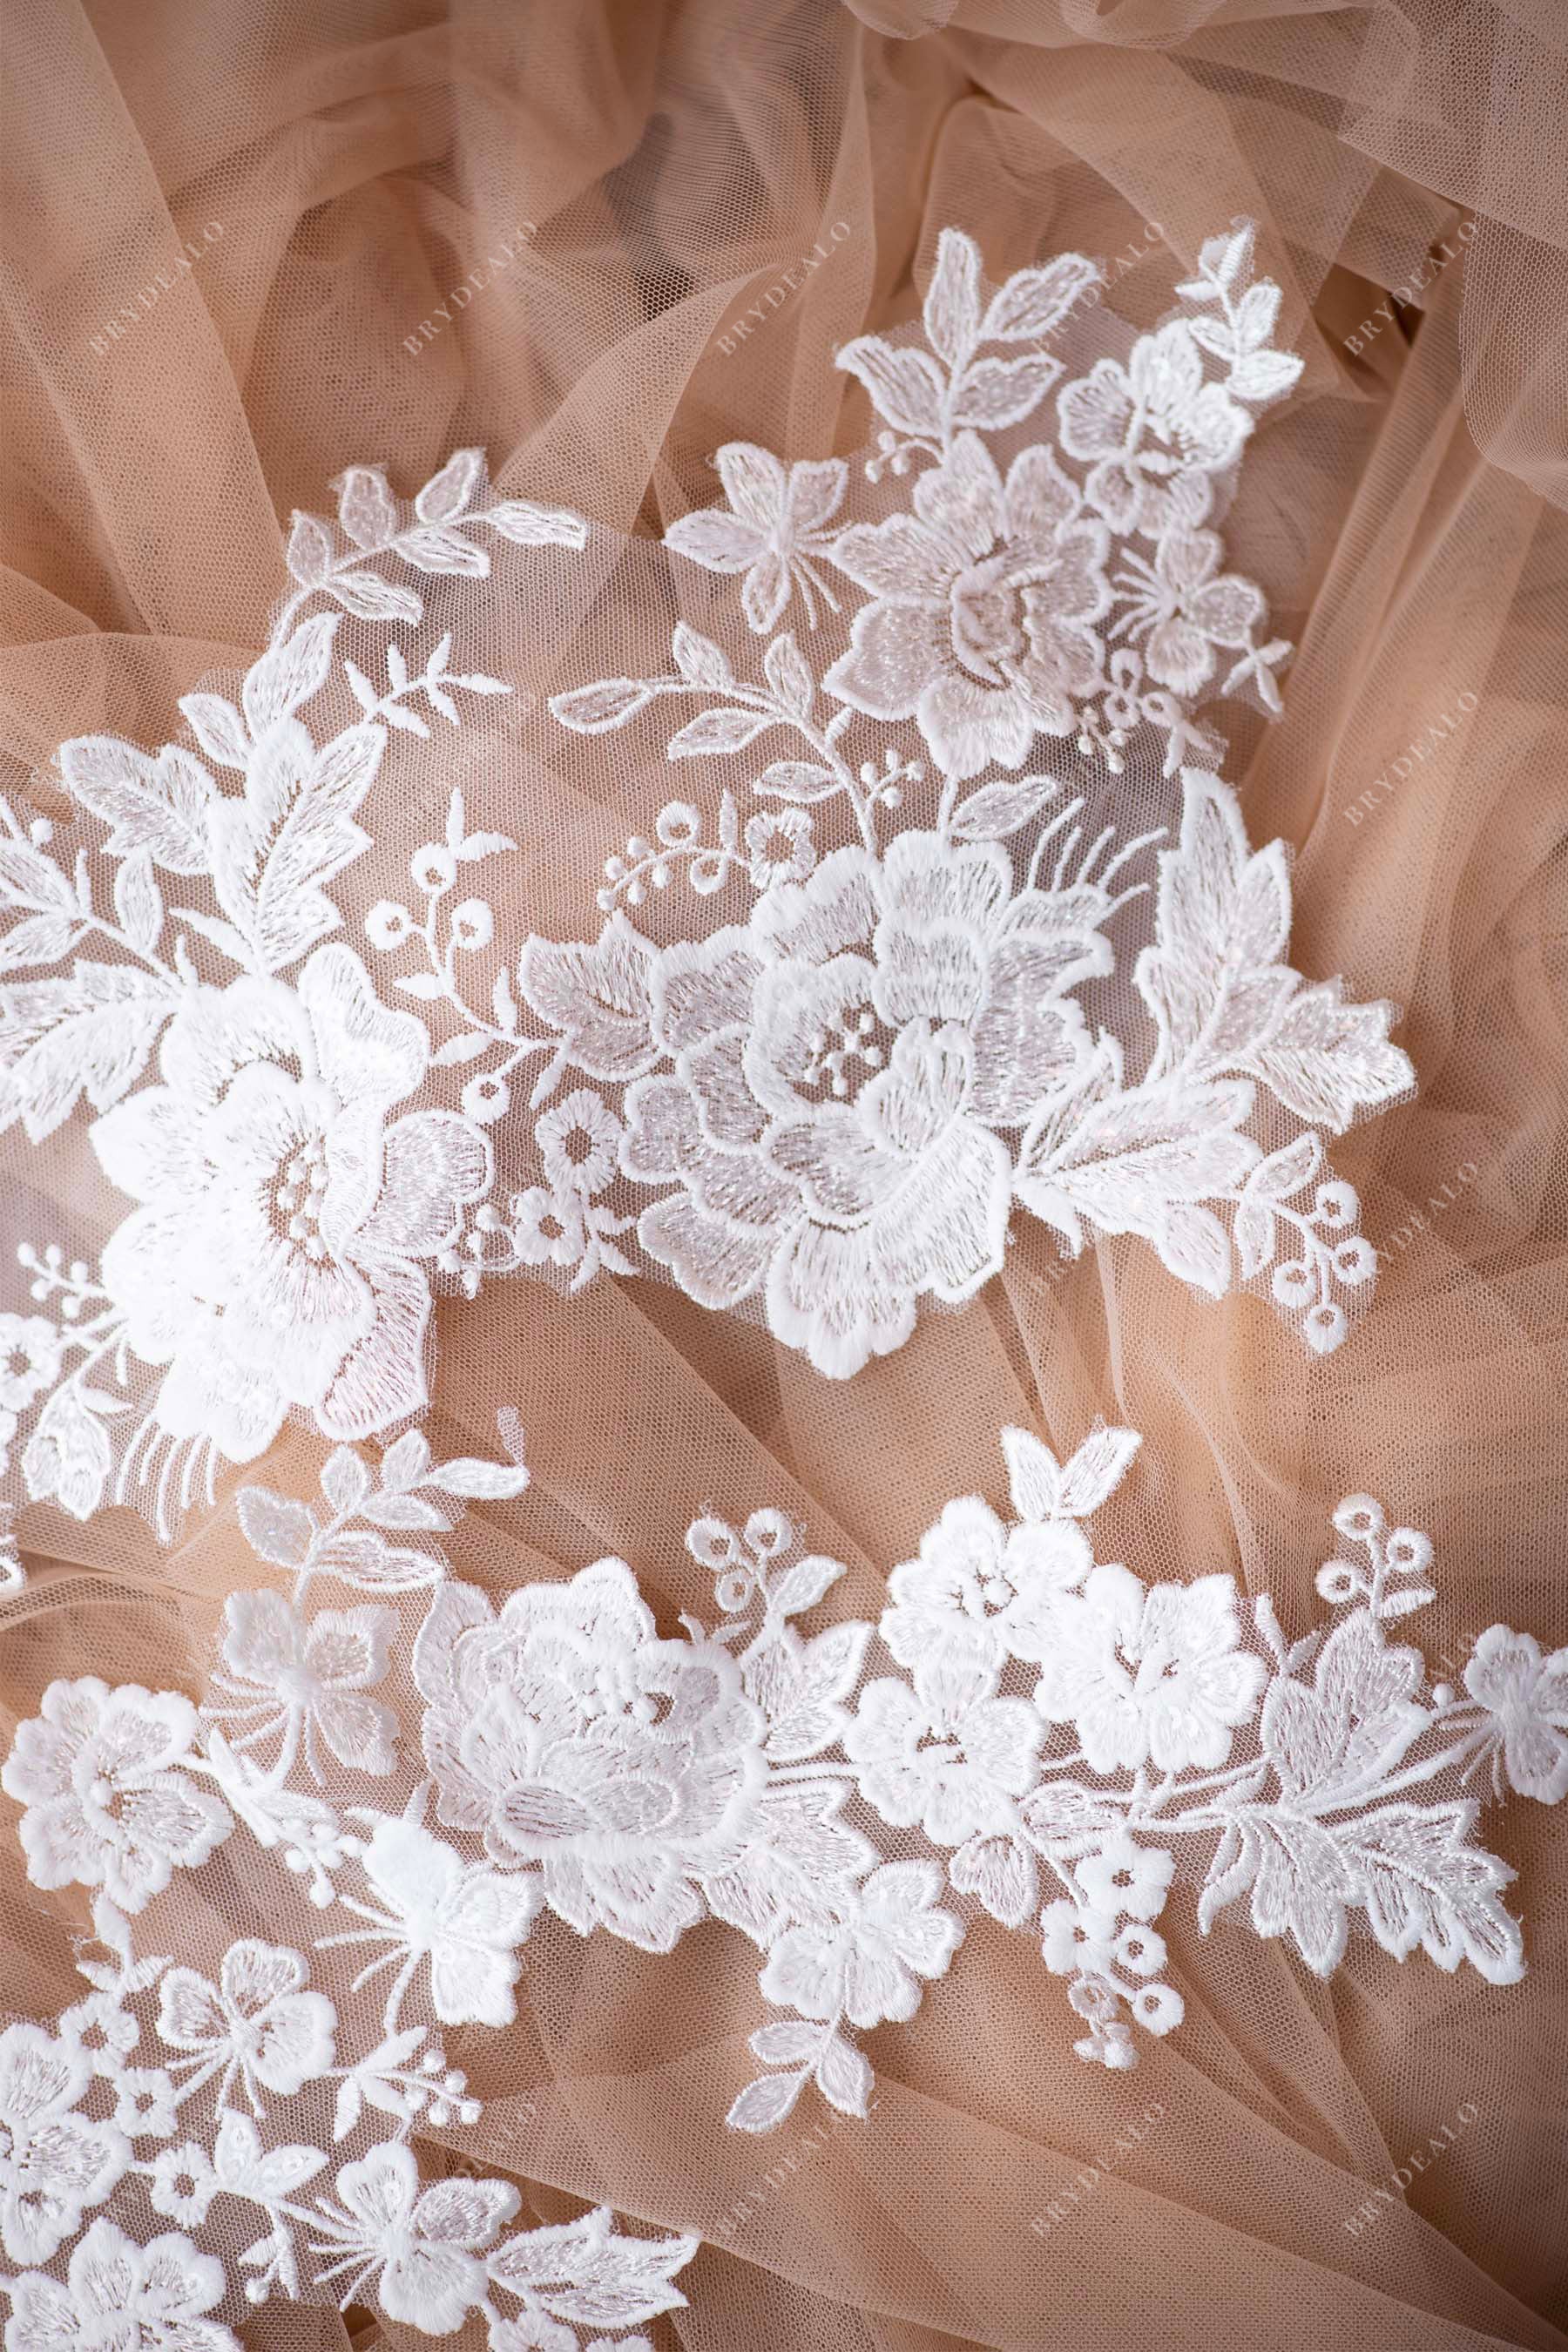 shimmery sheer sequined bridal lace appliques for wedding dress